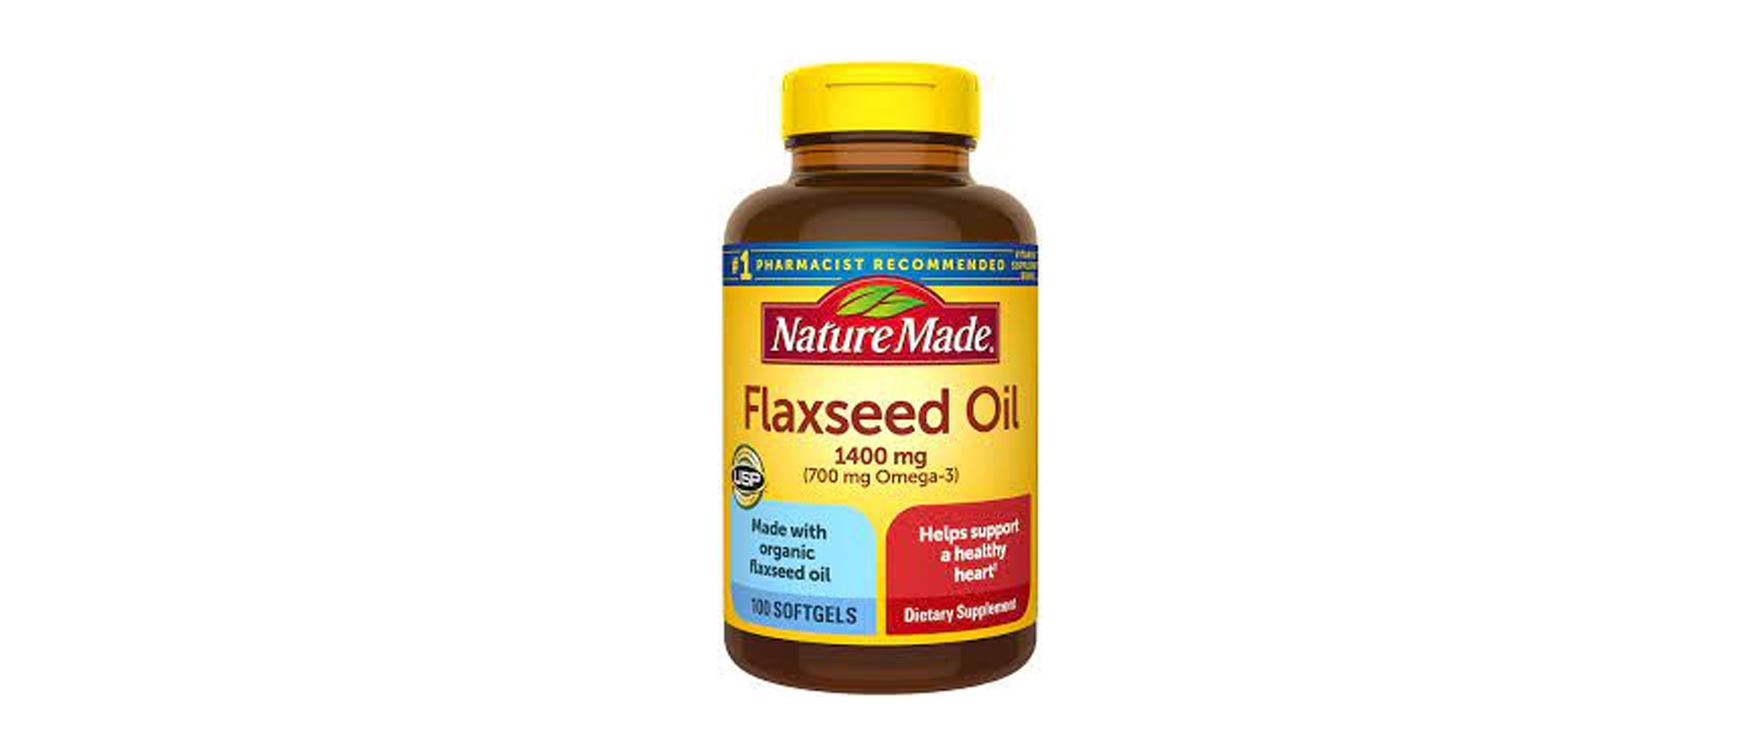 2. Recommended by the Experts: Flaxseed Oil 